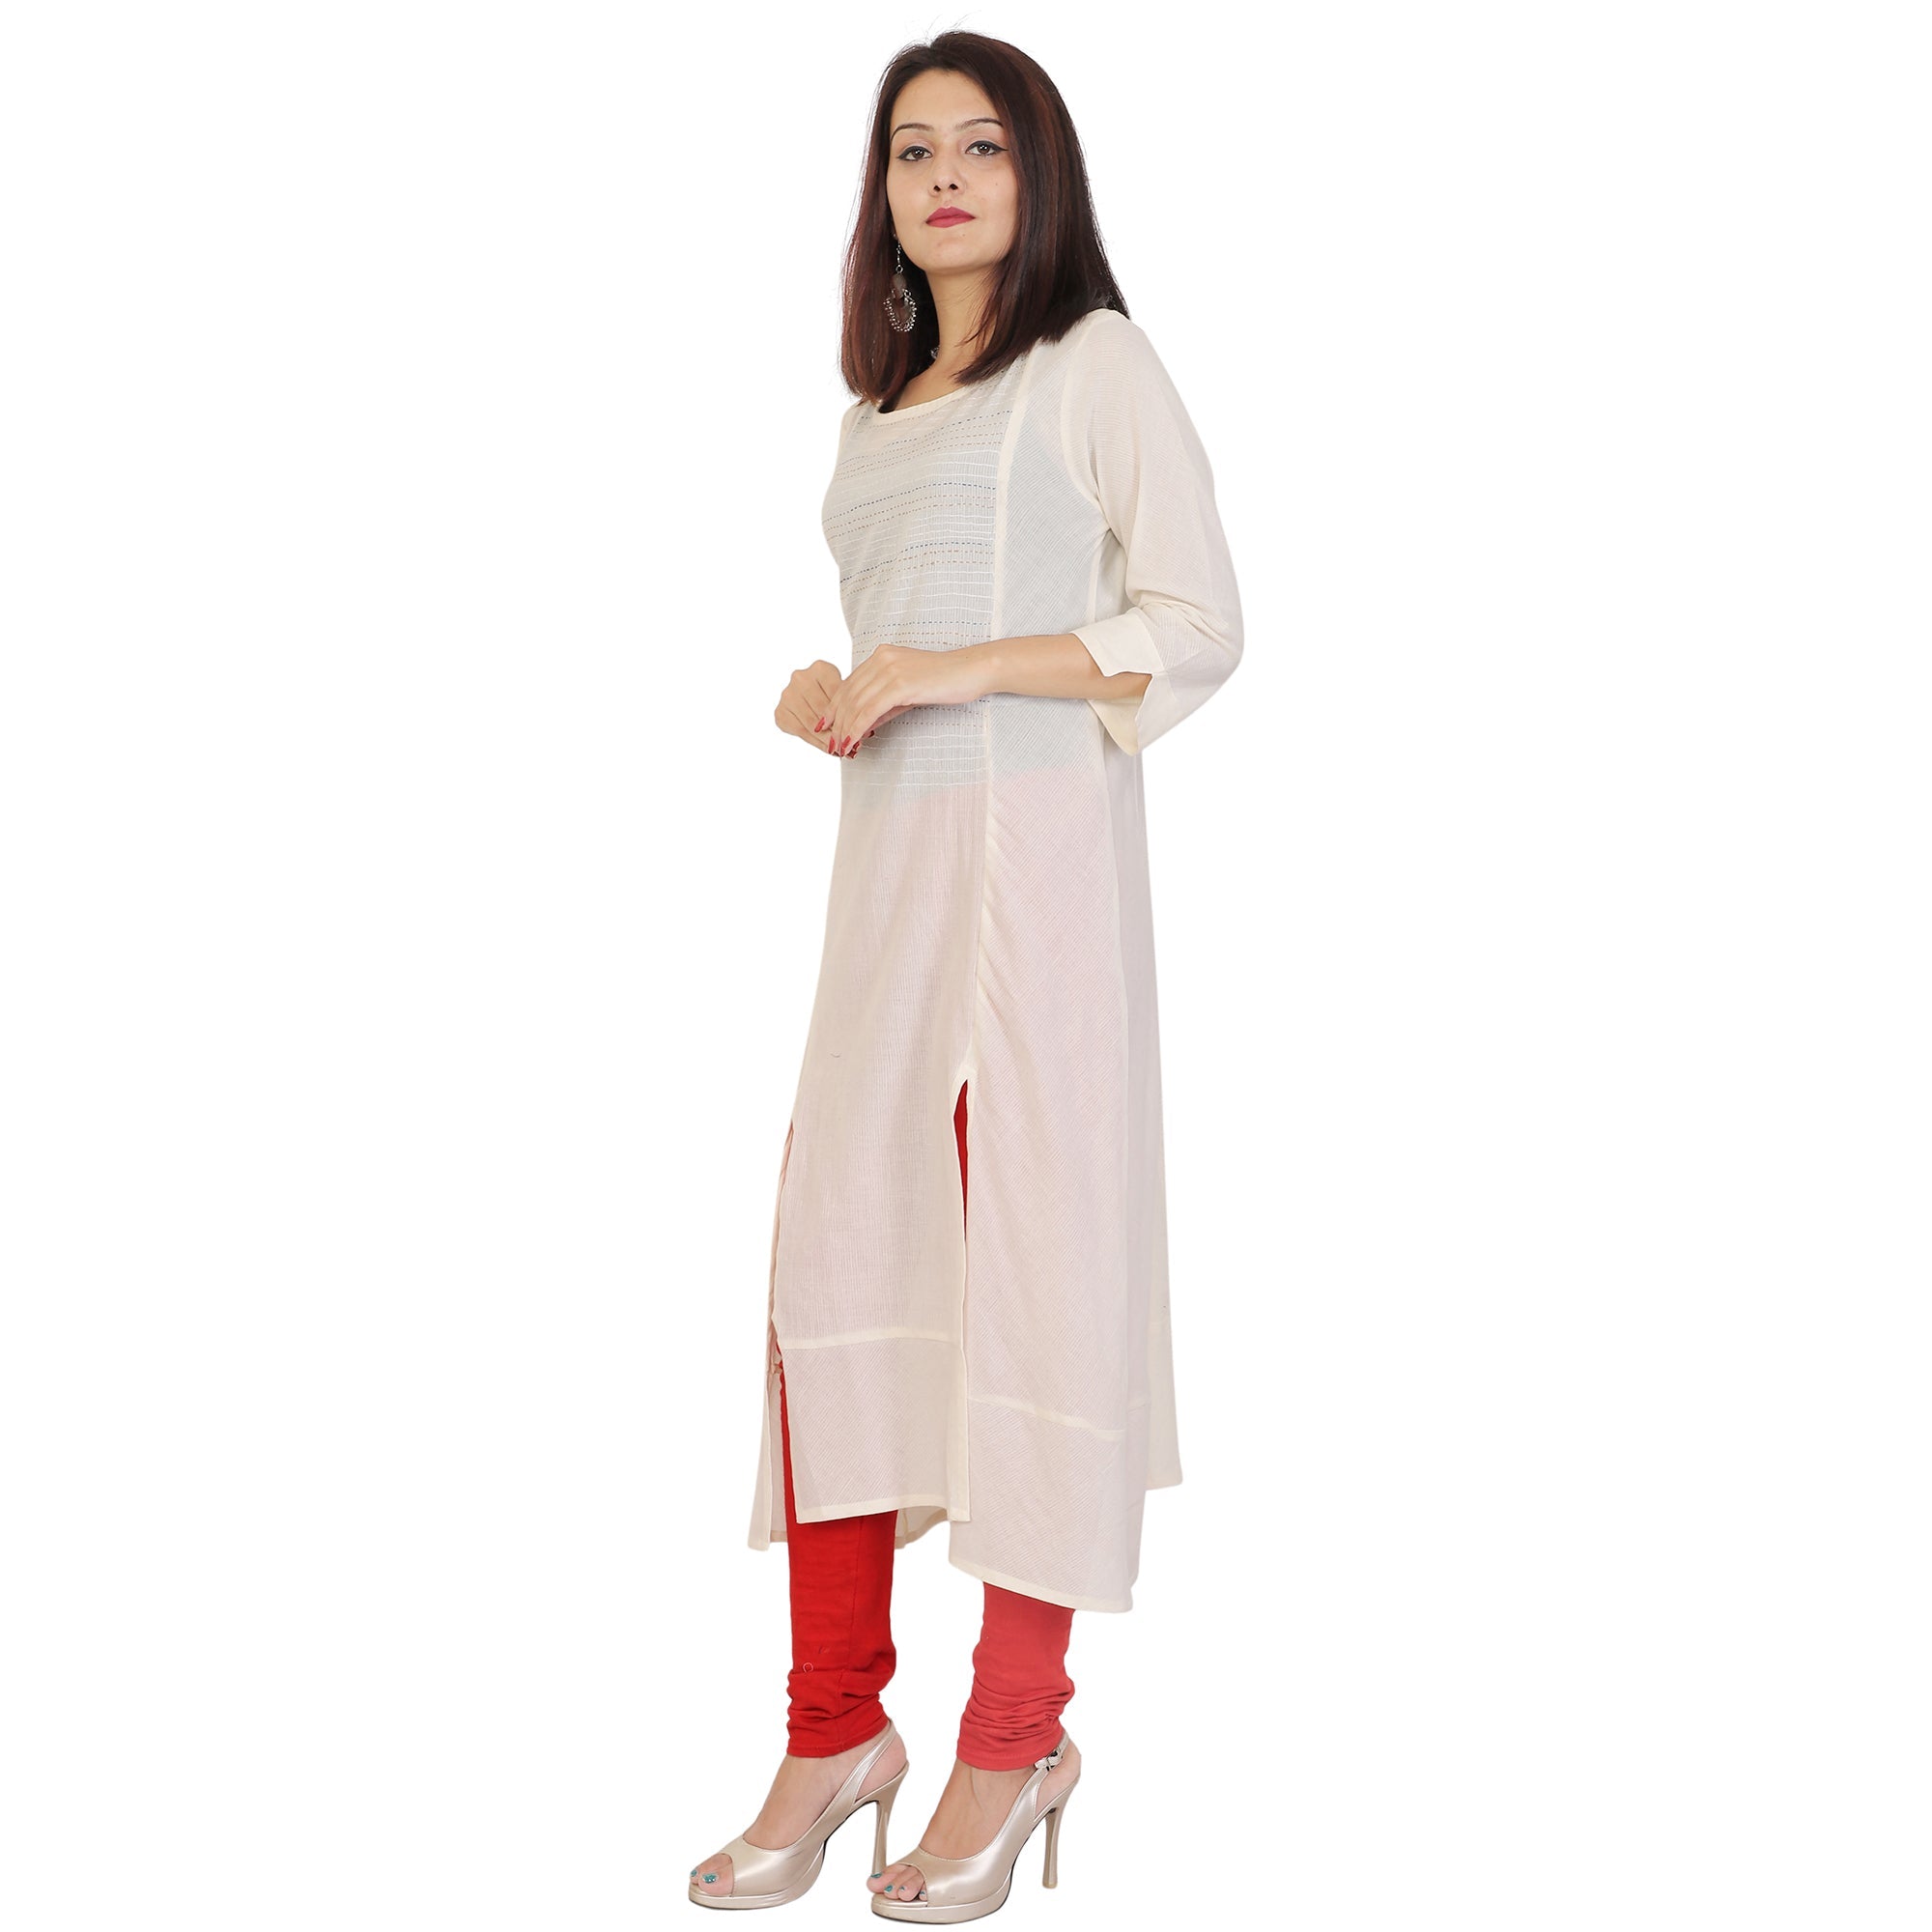 Buy Lastinch Women's Rayon Solid White Kurti for All Plus Size and Small  Size (LIIN091; White ;XXS -8XL) (XX-Small) at Amazon.in